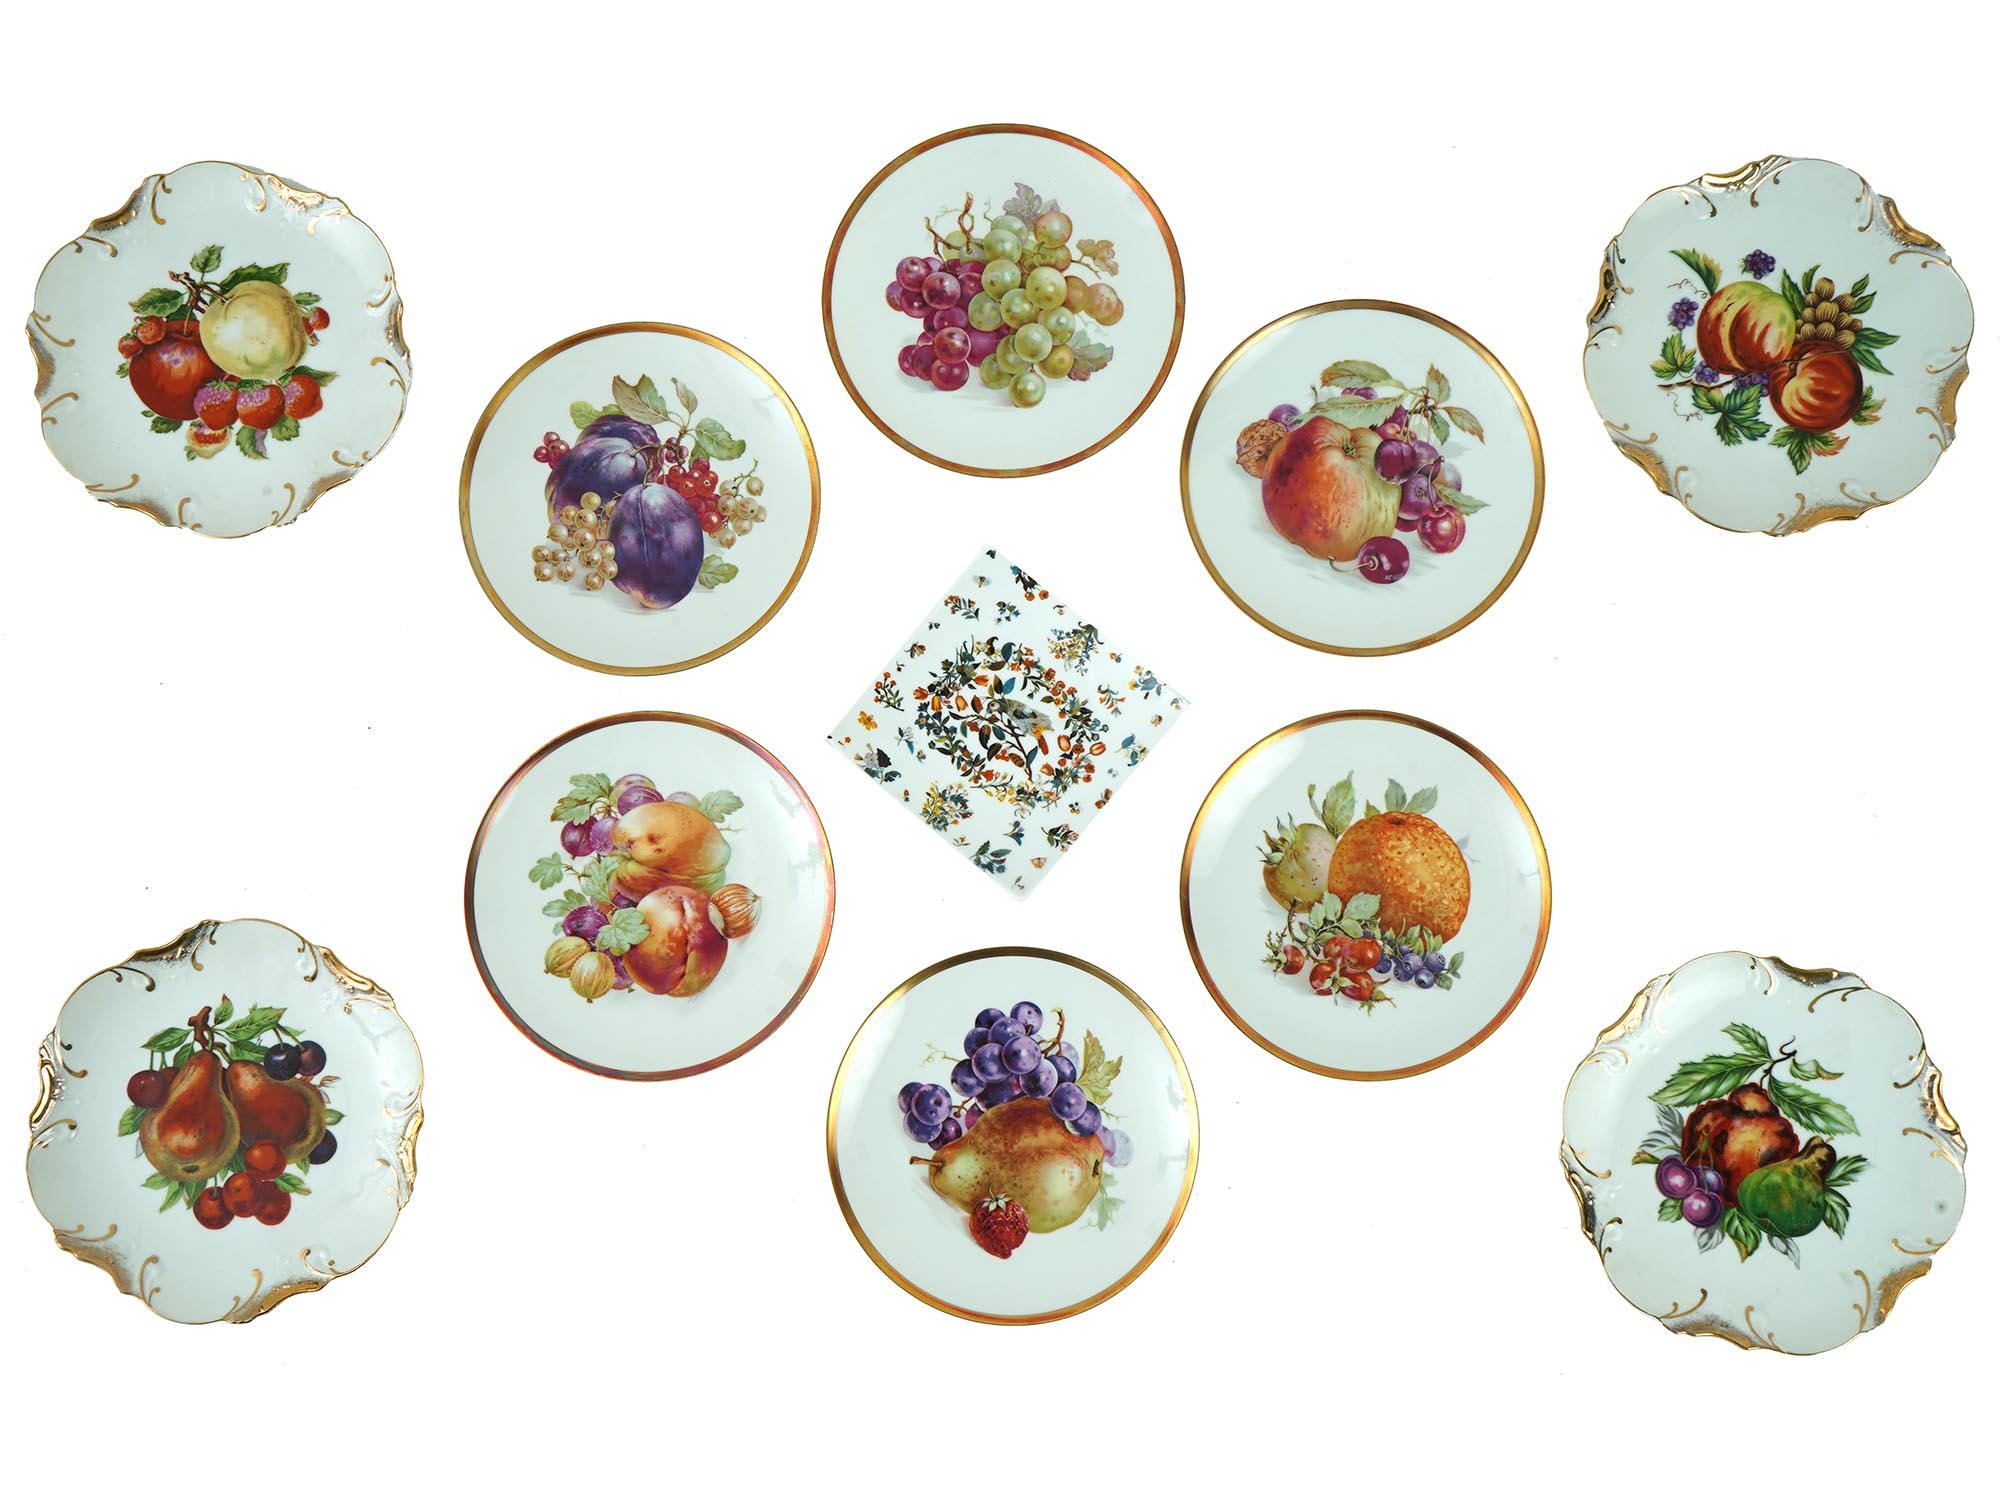 VINTAGE CERAMIC PLATES WITH HAND PAINTED FRUIT DESIGN PIC-0